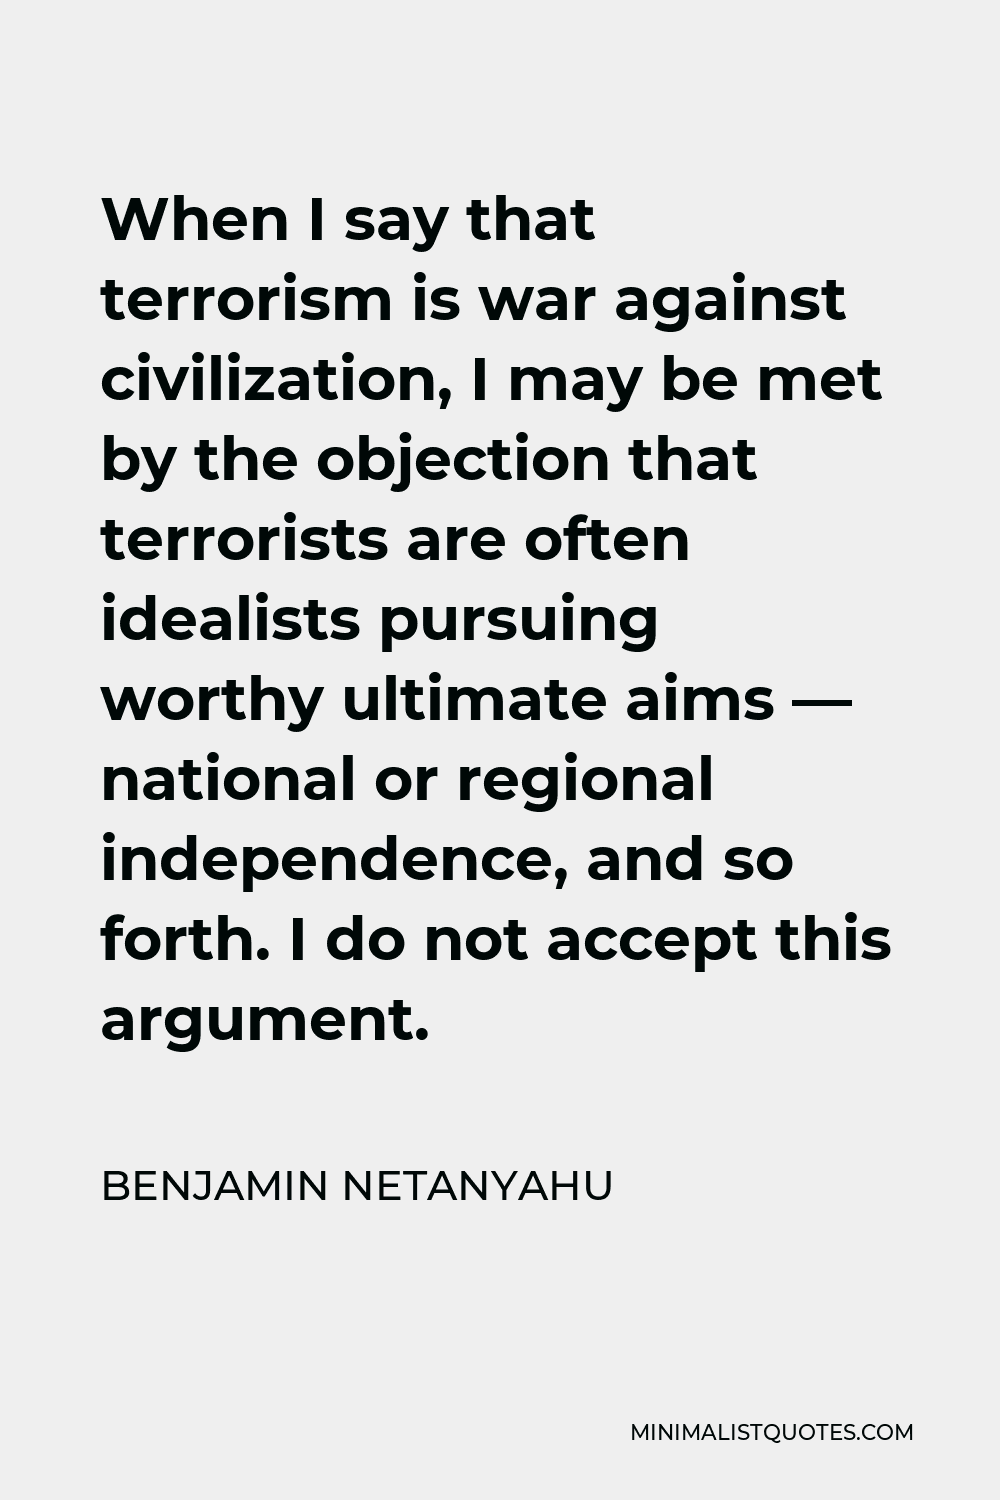 Benjamin Netanyahu Quote - When I say that terrorism is war against civilization, I may be met by the objection that terrorists are often idealists pursuing worthy ultimate aims — national or regional independence, and so forth. I do not accept this argument.